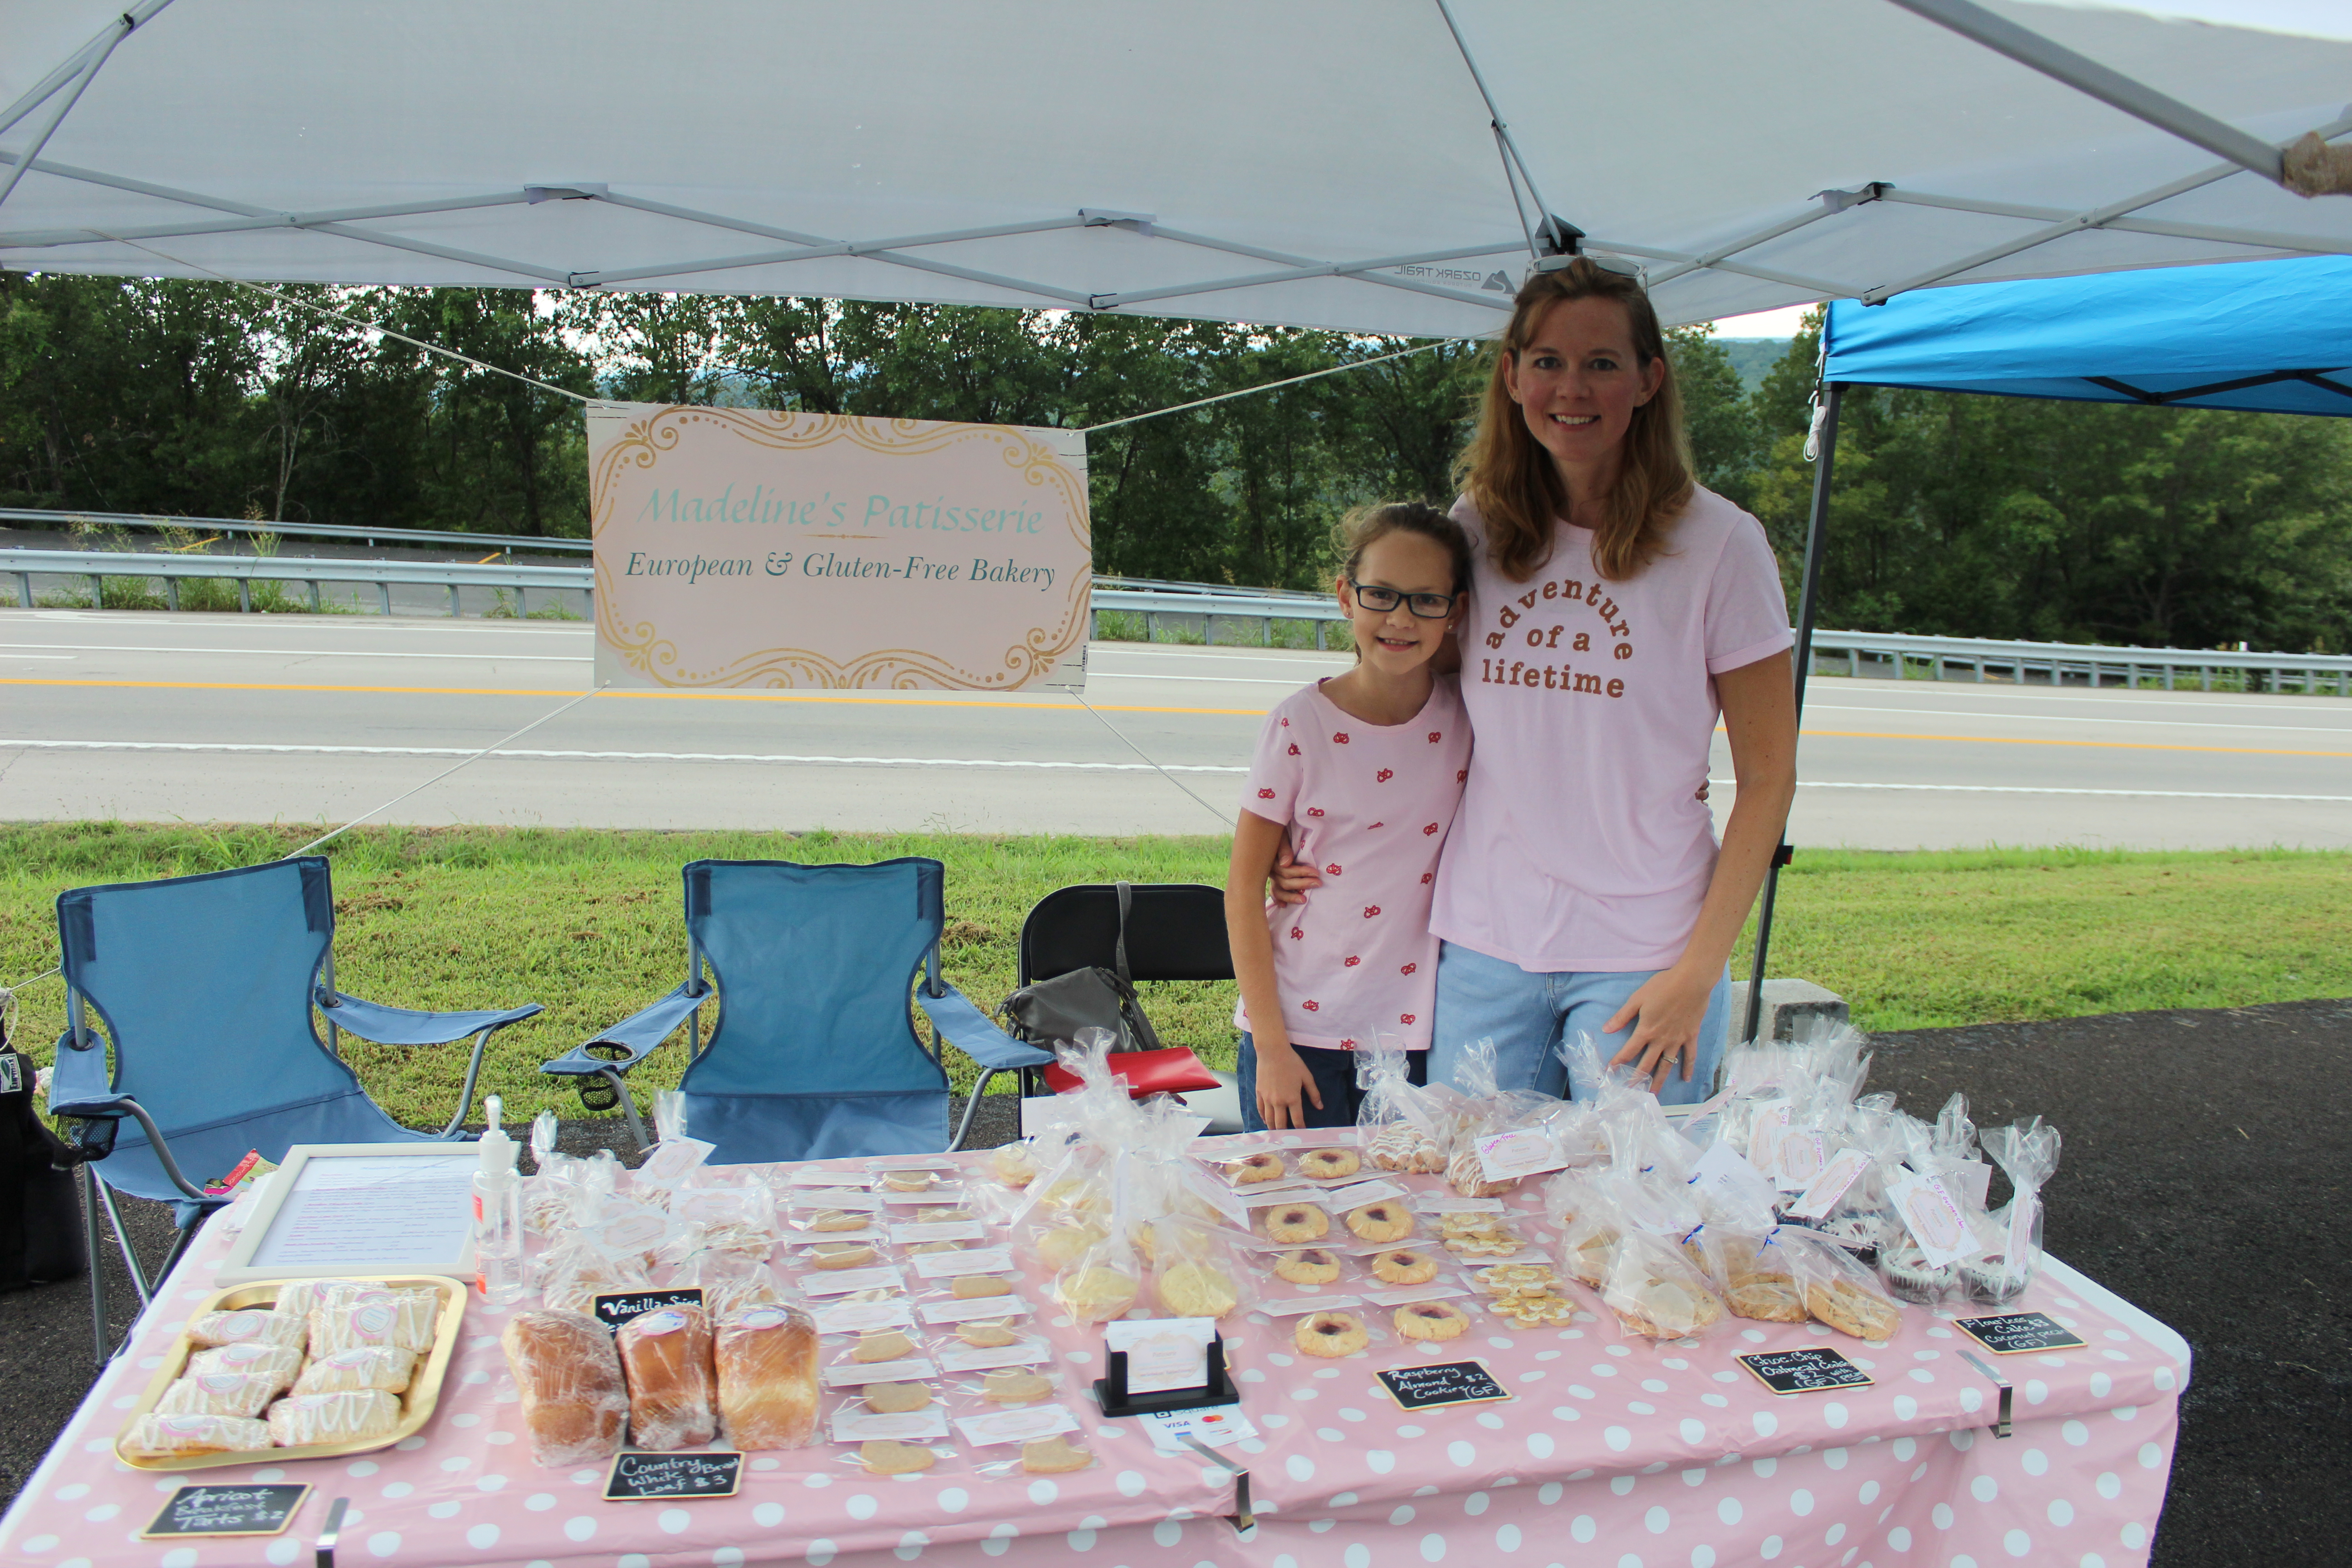 190817 1time Madeline Hanley left and Kristen Hanley right pose at their table where they are selling baked goods for Madeline Patisseries. - New Farmer’s Market, train system, eateries, and live shows at Shepherd of the Hills